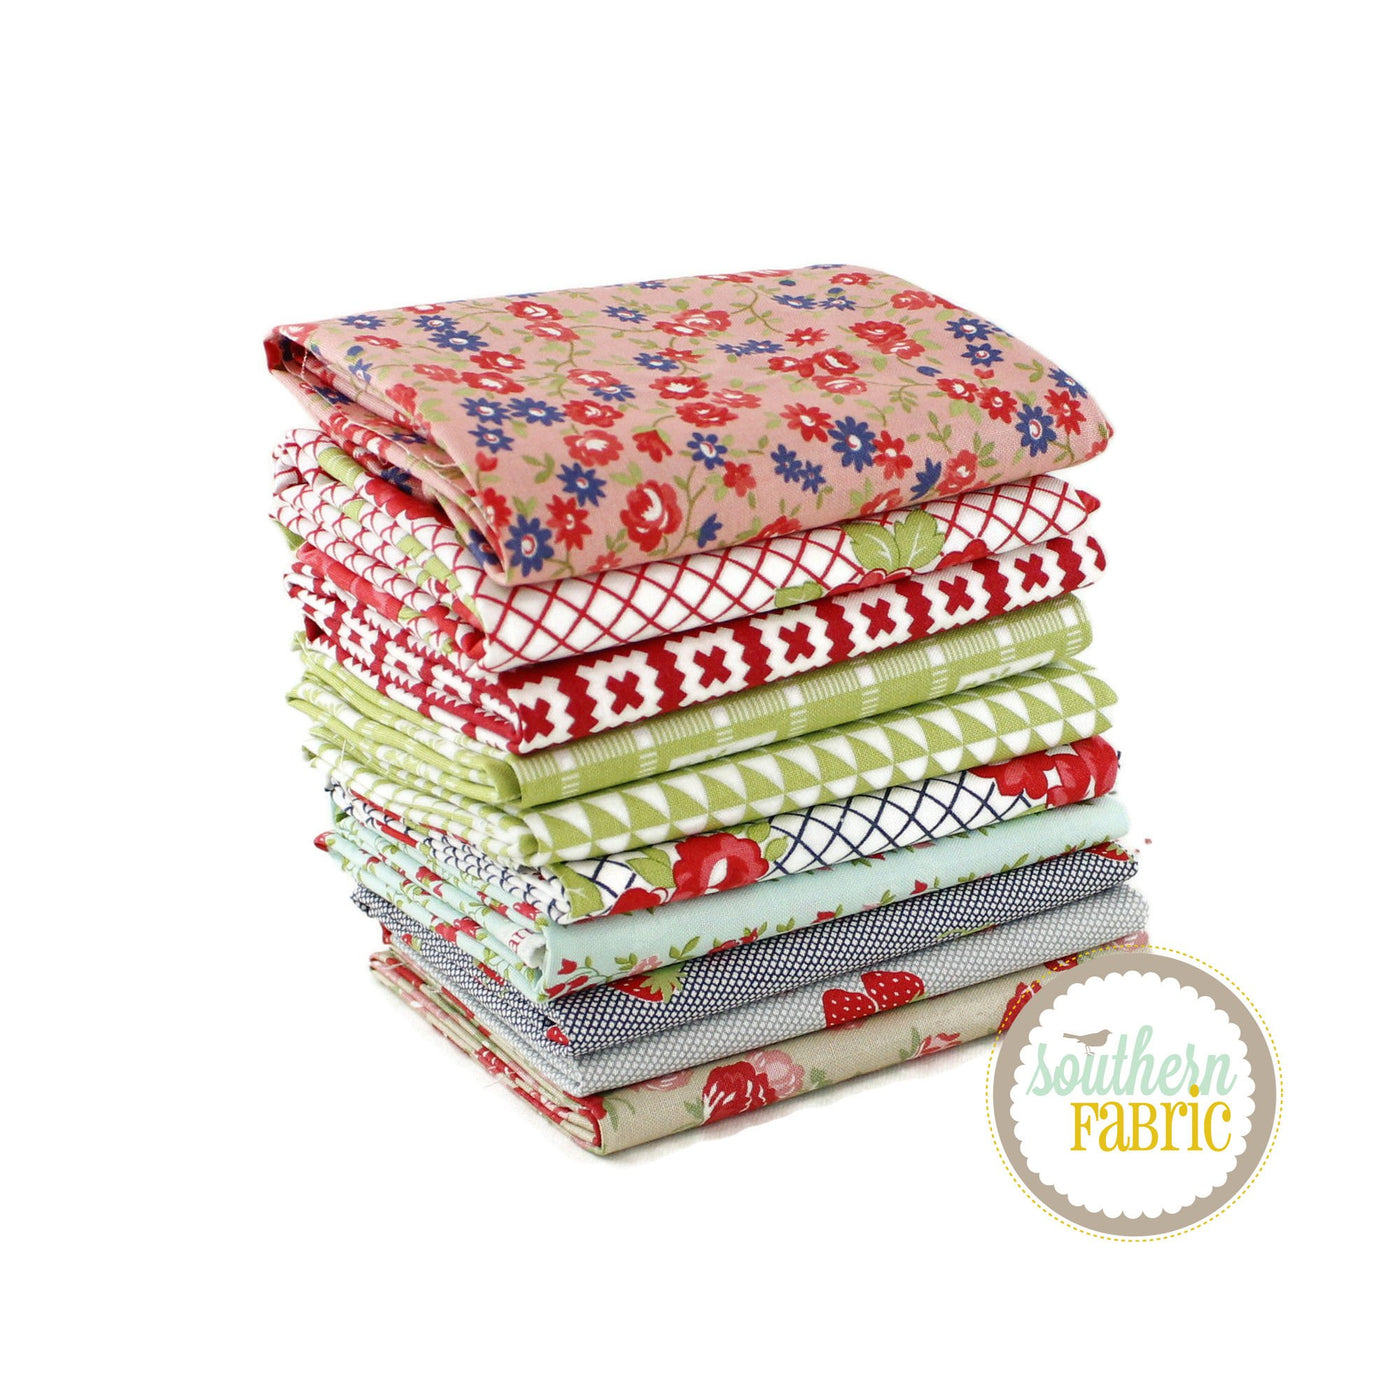 Bonnie and Camille Fat Quarter Bundle (10 pcs) by Bonnie and Camille for Moda